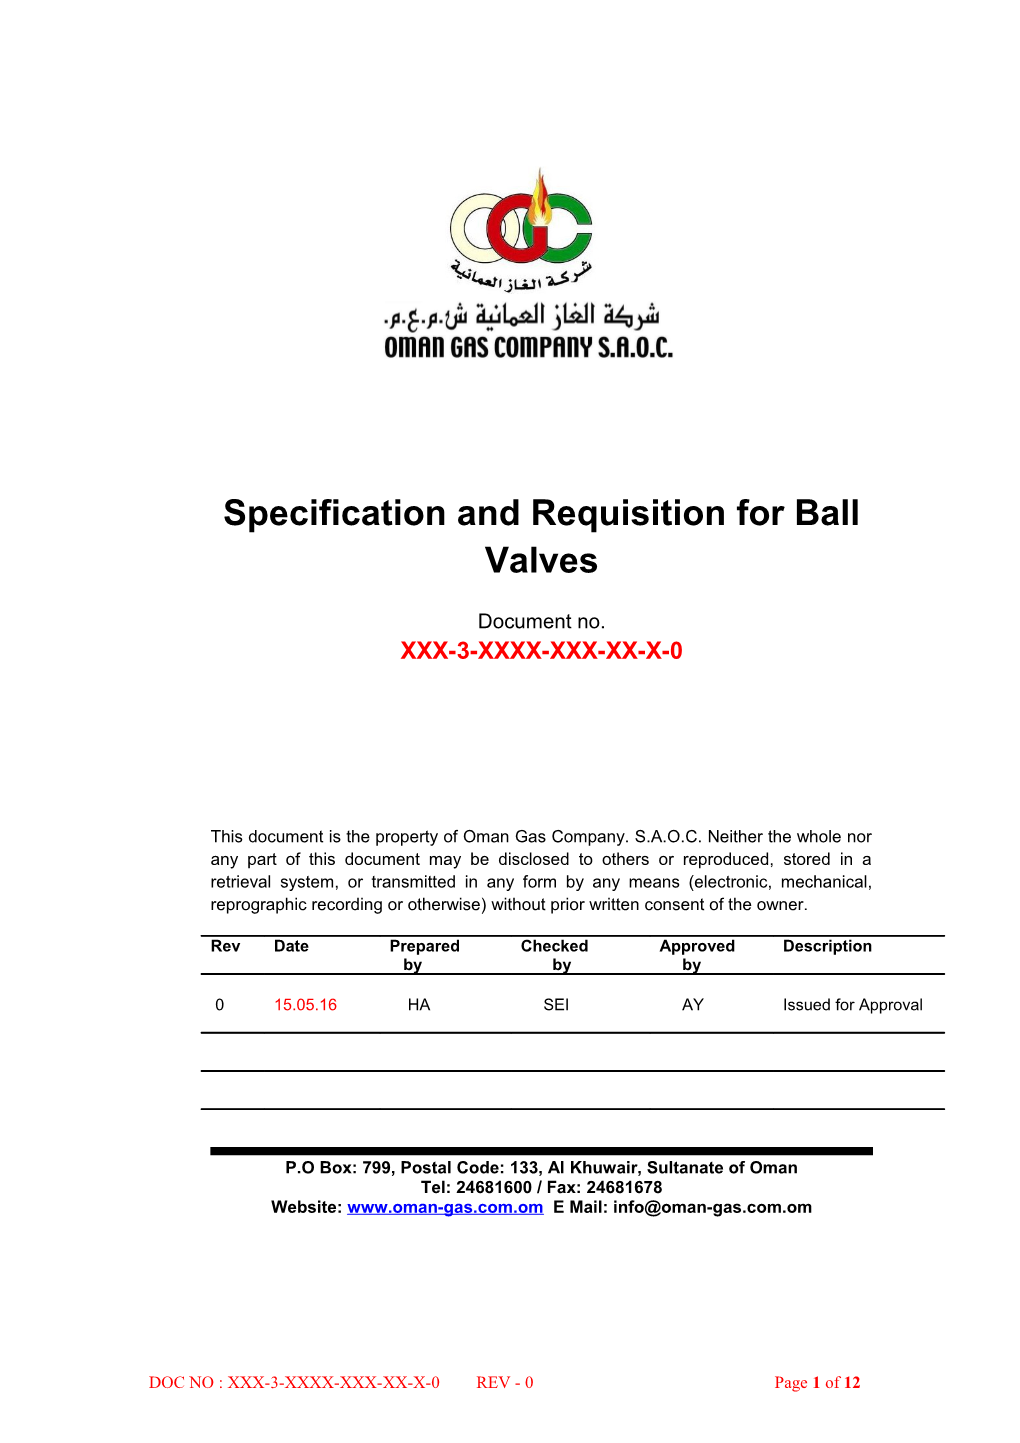 Specification and Requisition for Ball Valves